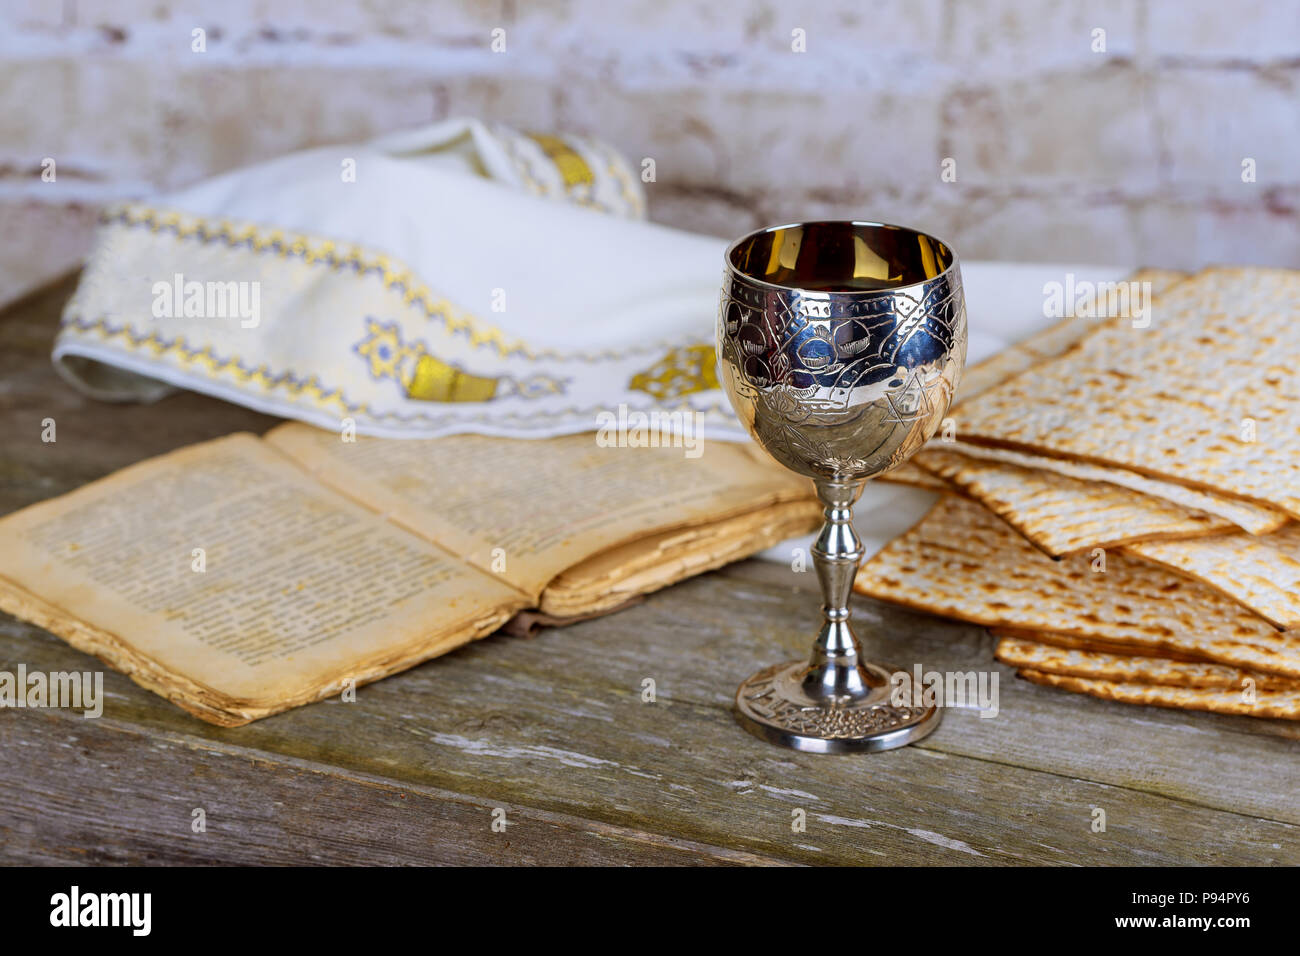 Jewish holidays Passover Pesach matzah and silver cup full of wine with a traditional blessing kiddush cup of wine Stock Photo